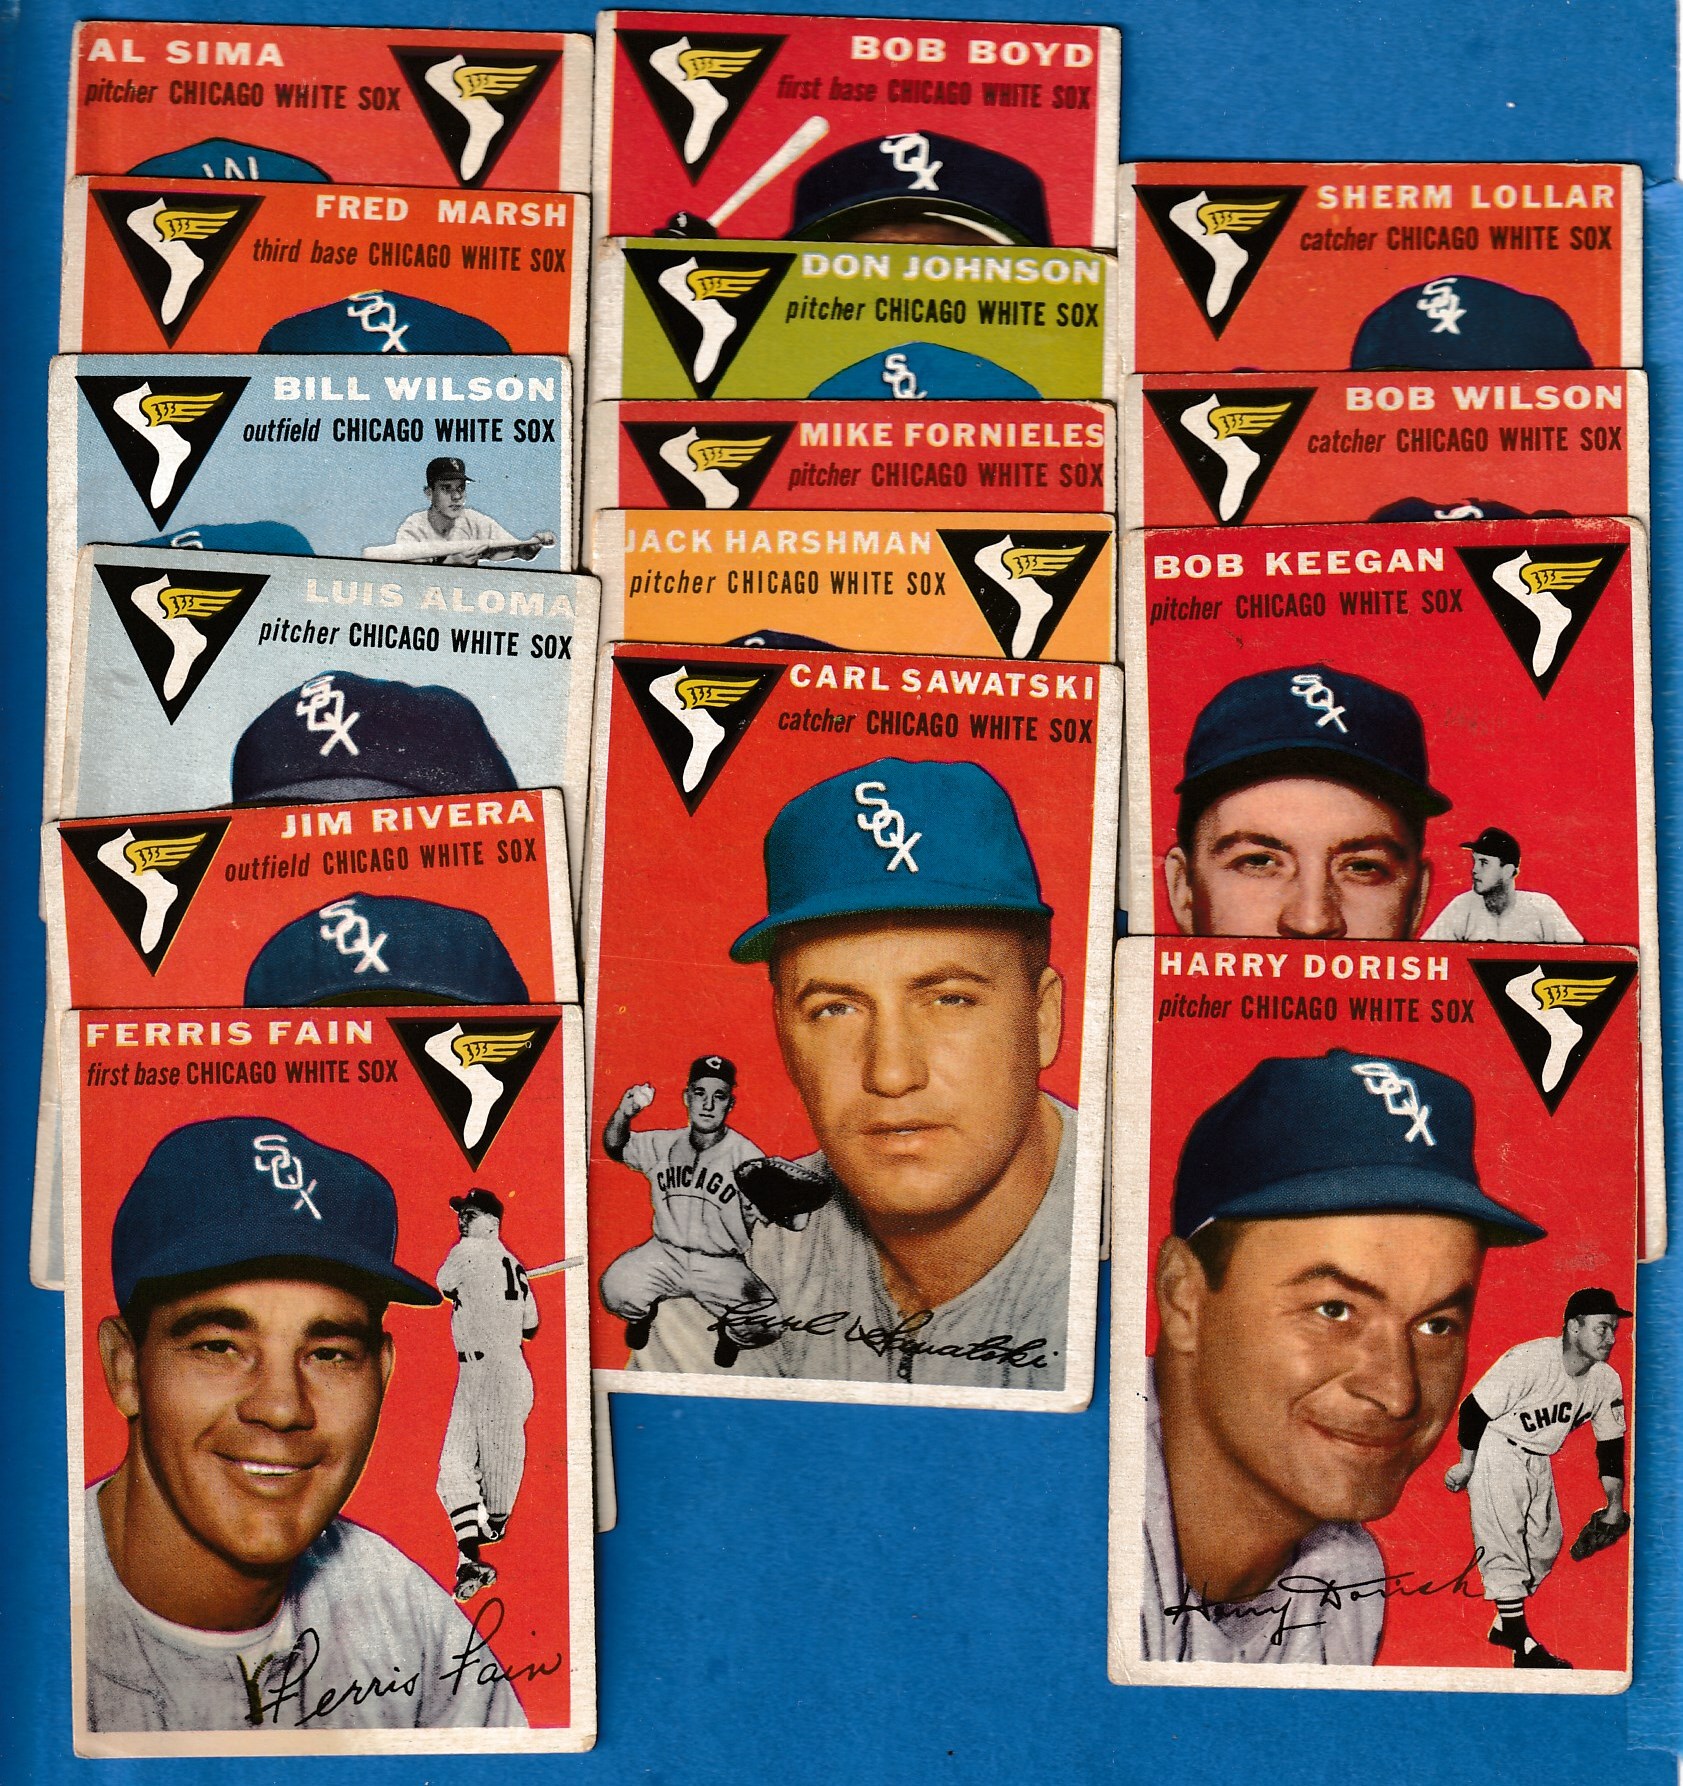  Chicago White Sox - 1954 Topps Near Complete Team Set (14/15 cards) Baseball cards value